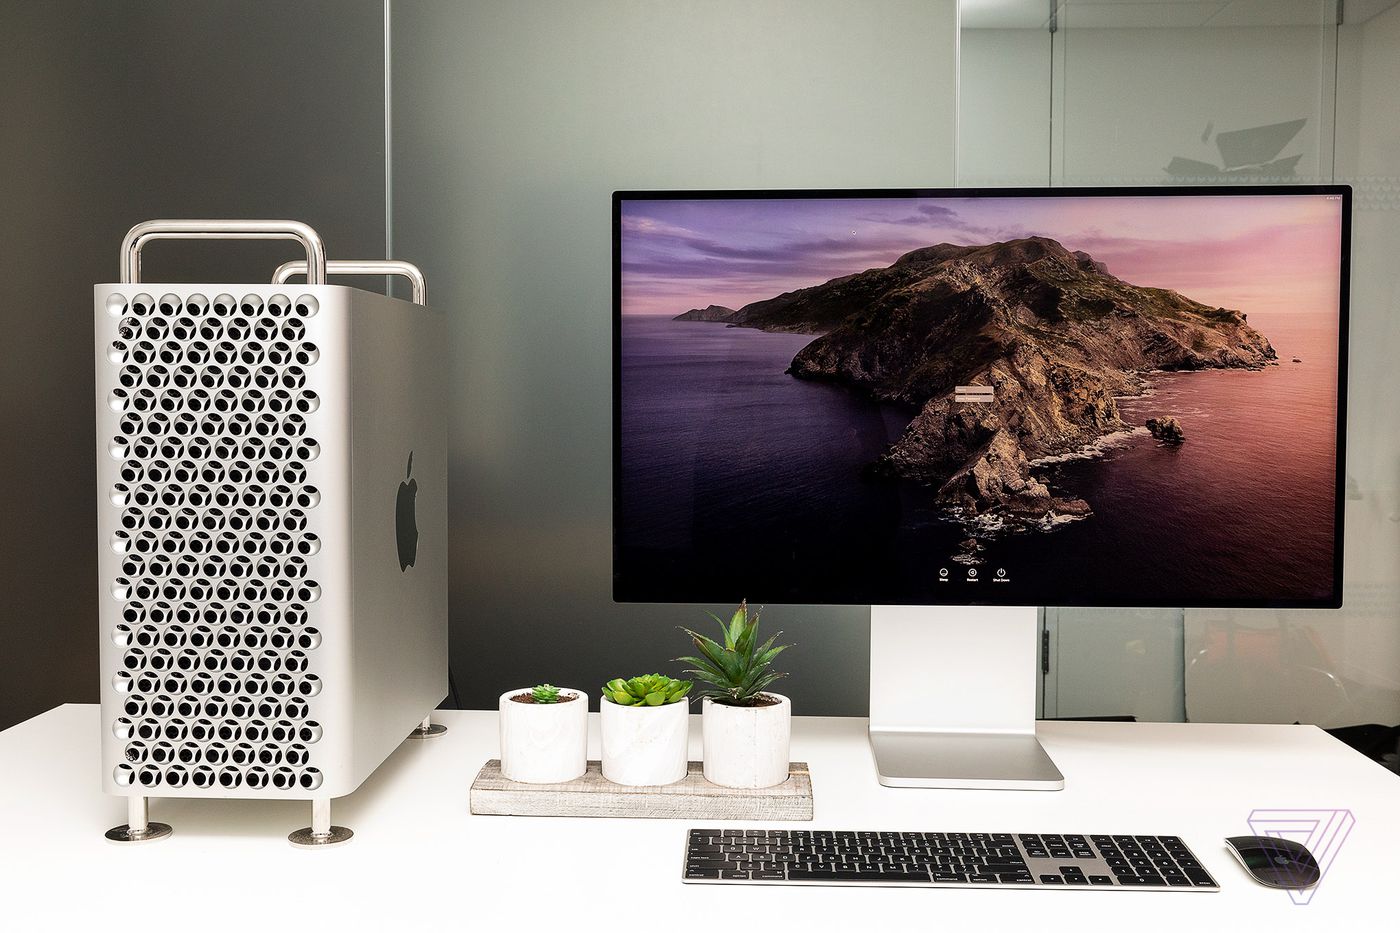 usb 3 for mac pro tower